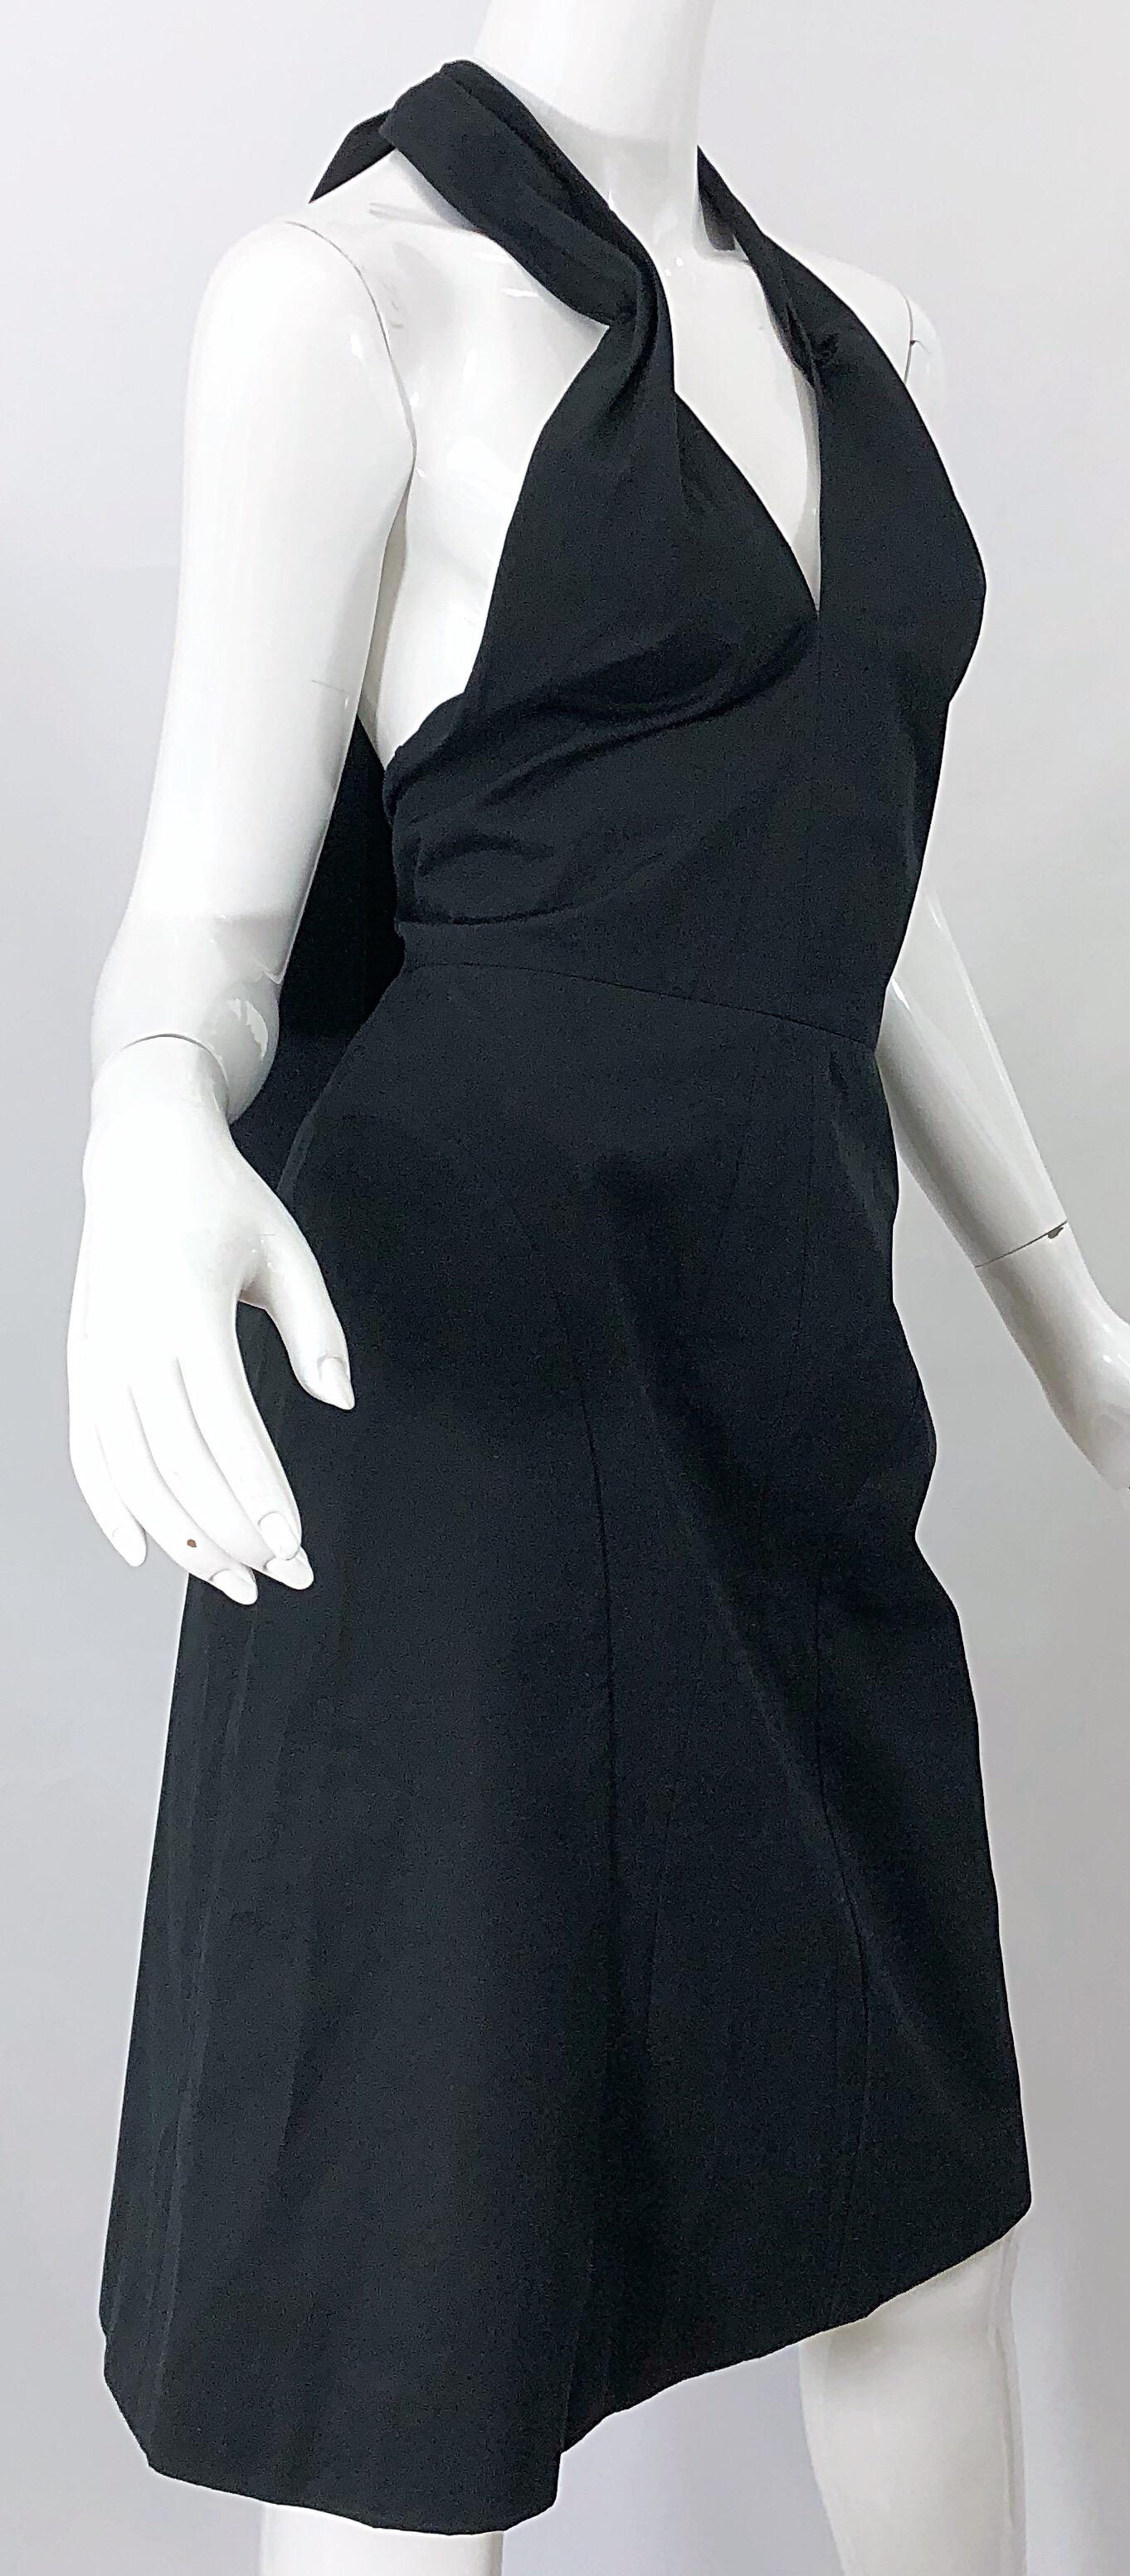 Yves Saint Laurent SS 2010 Runway Black Cotton Size 38 Plunging YSL Halter Dress In Excellent Condition For Sale In San Diego, CA